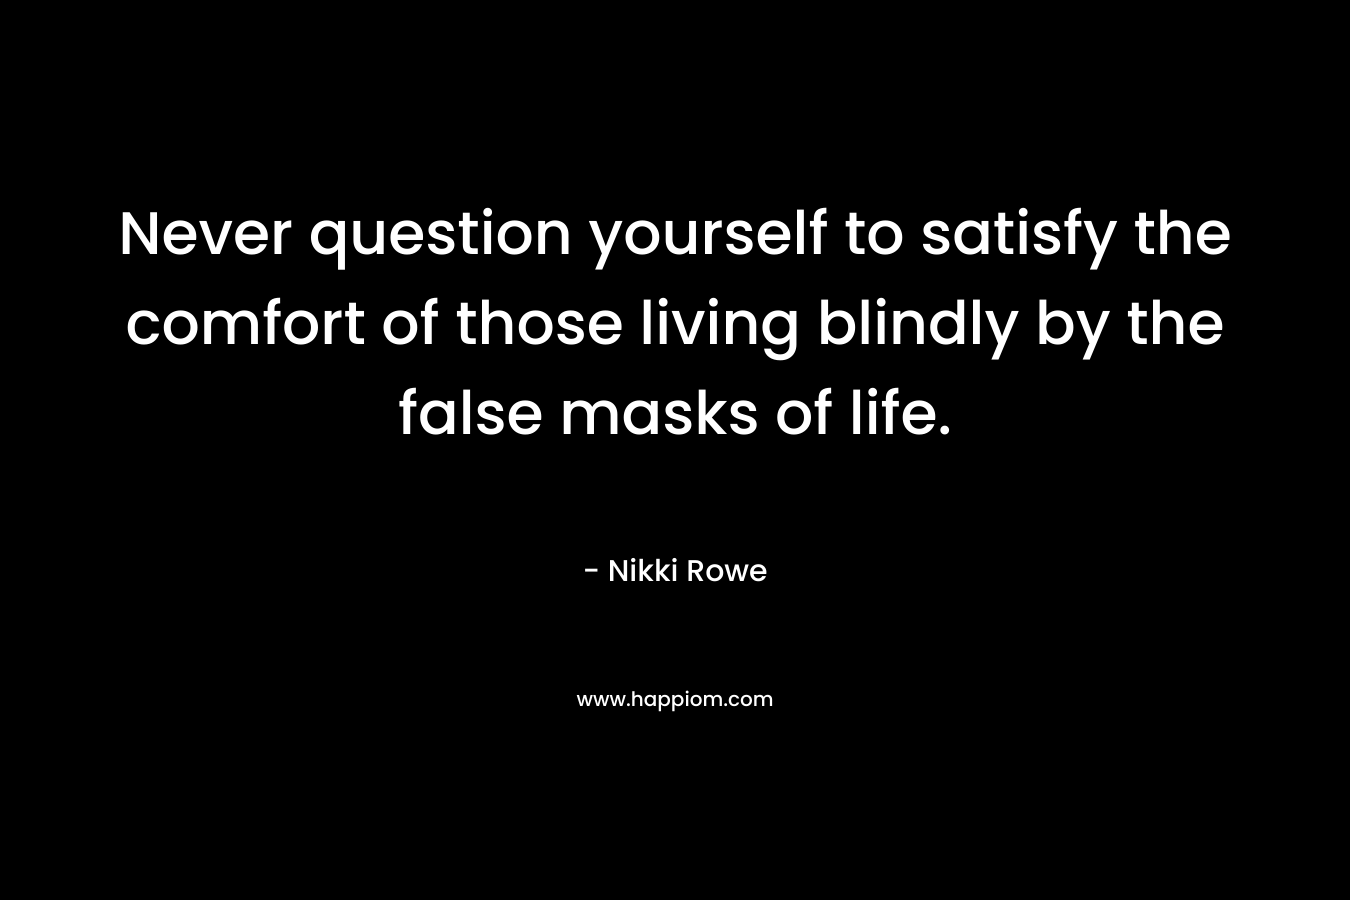 Never question yourself to satisfy the comfort of those living blindly by the false masks of life.